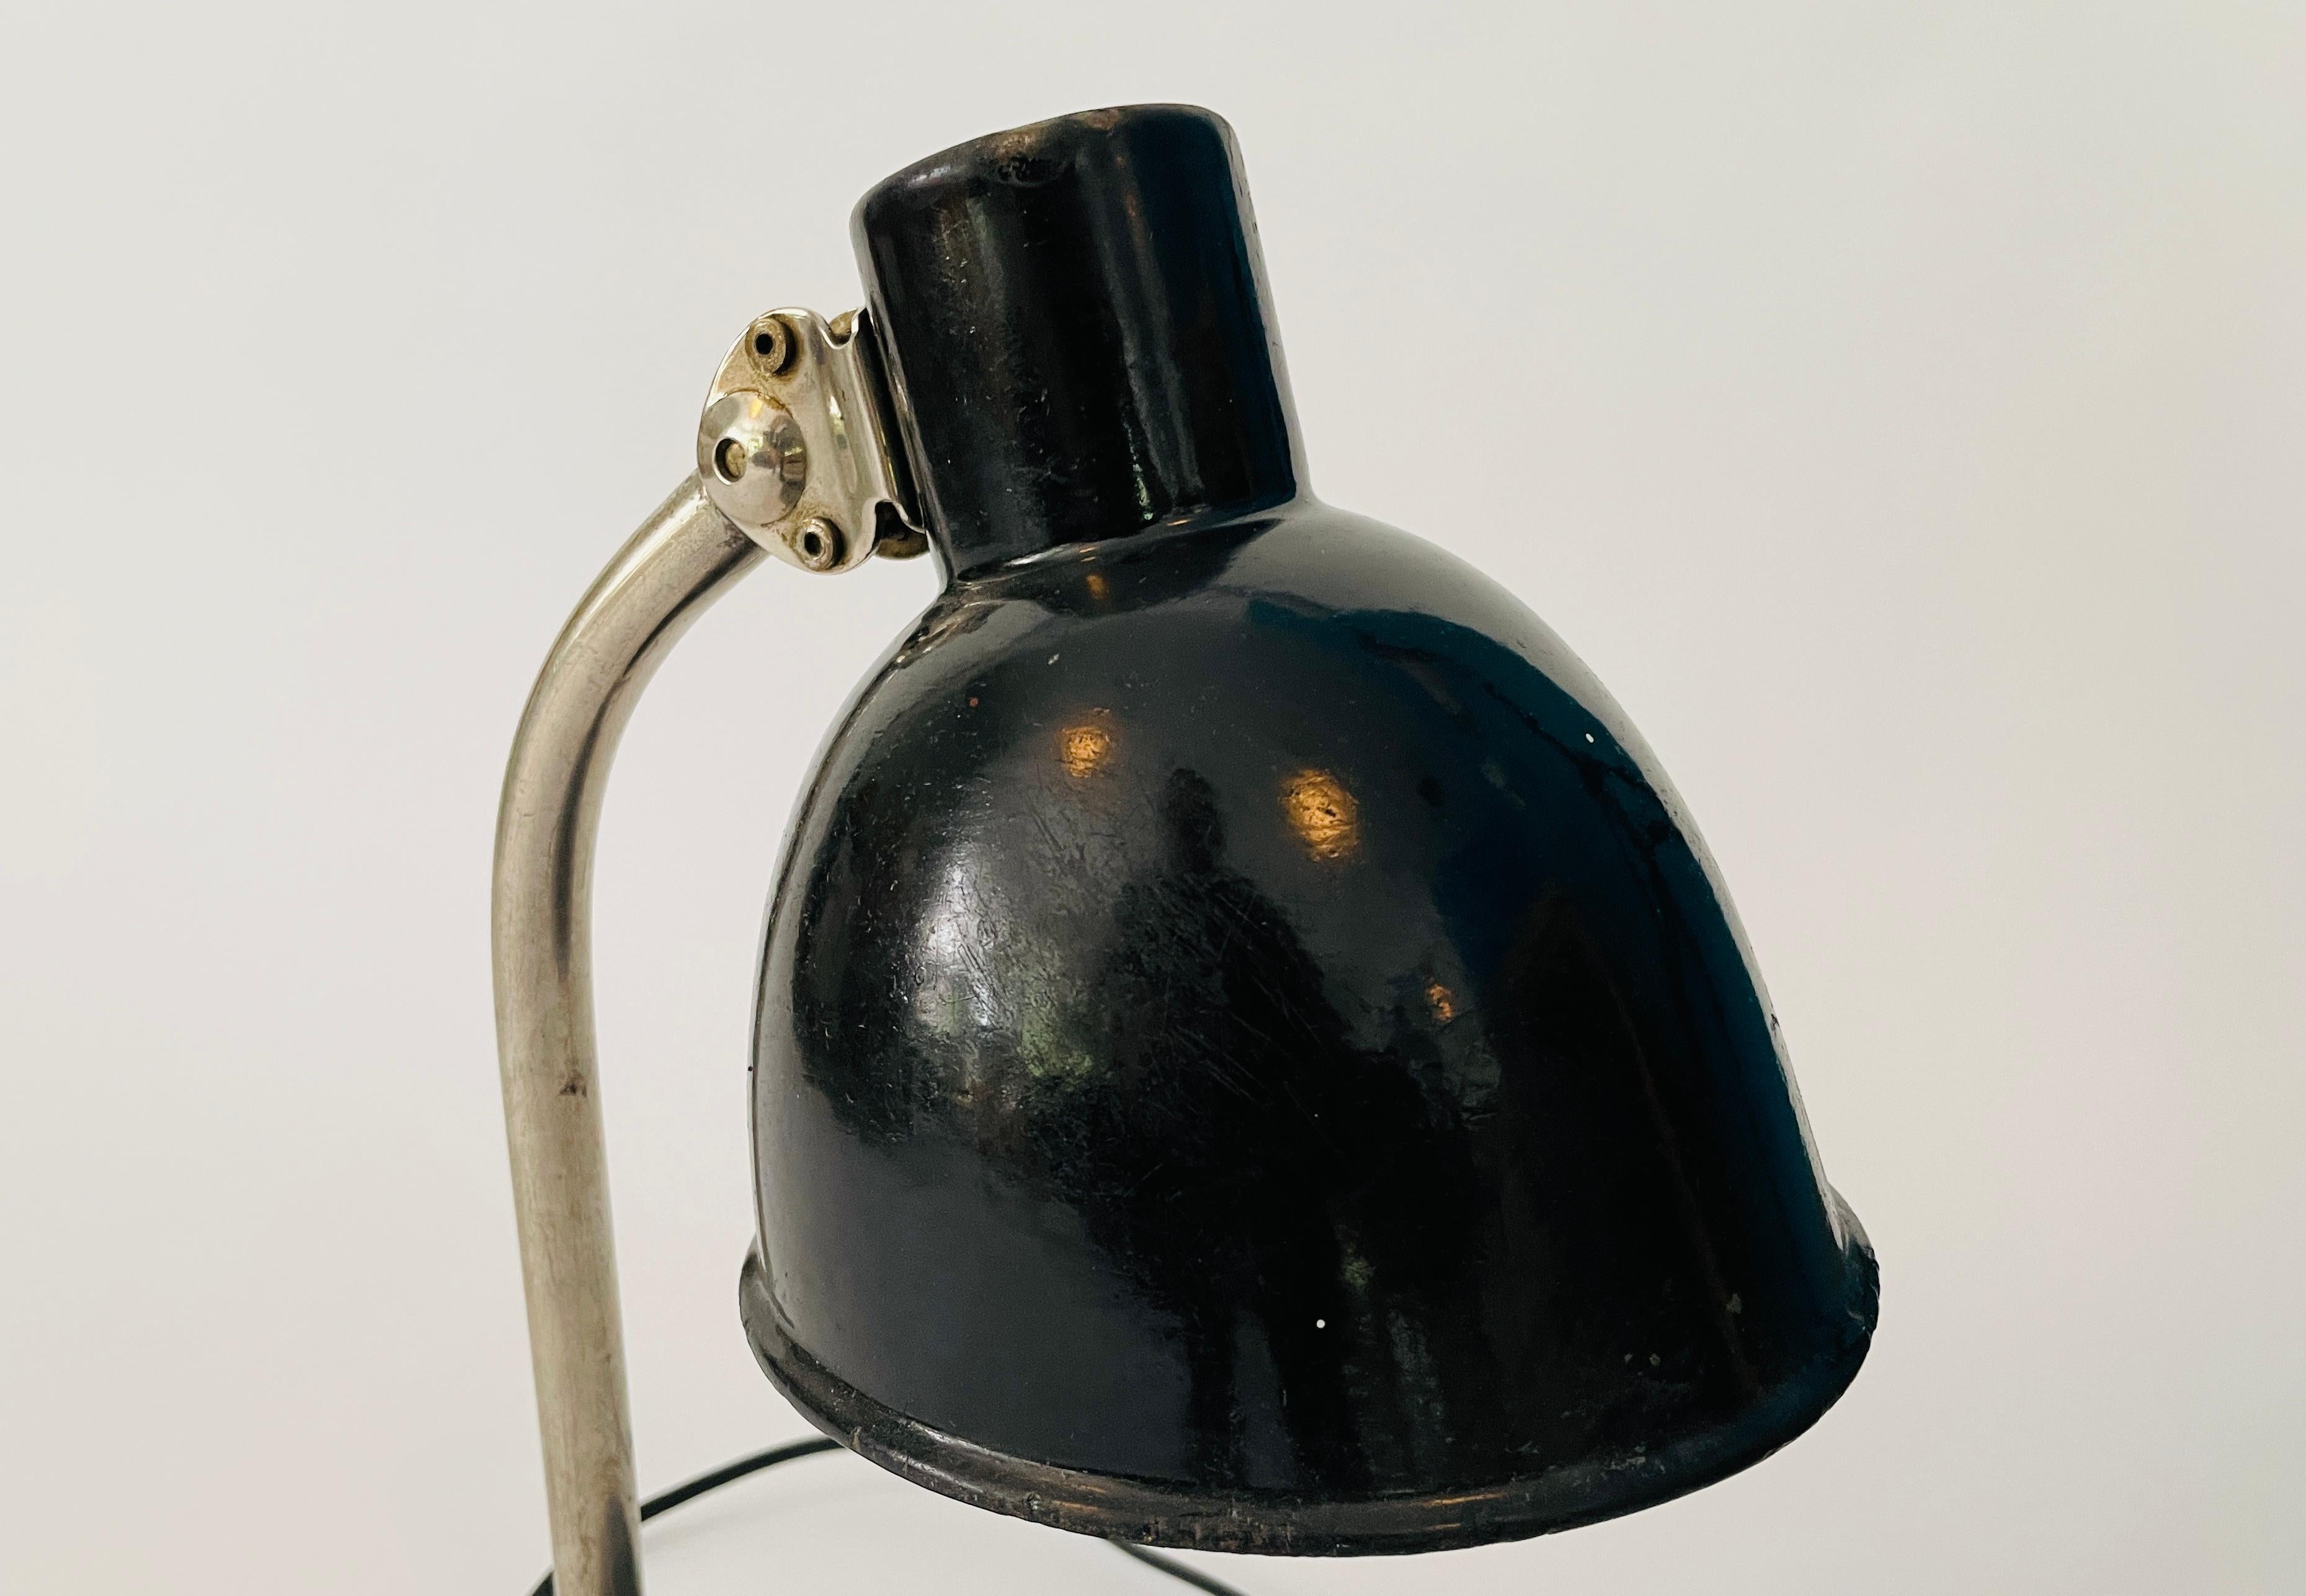 Metal Early Paavo Tynell Desk Lamp, Model 5307, TAITO Finland 1930's For Sale